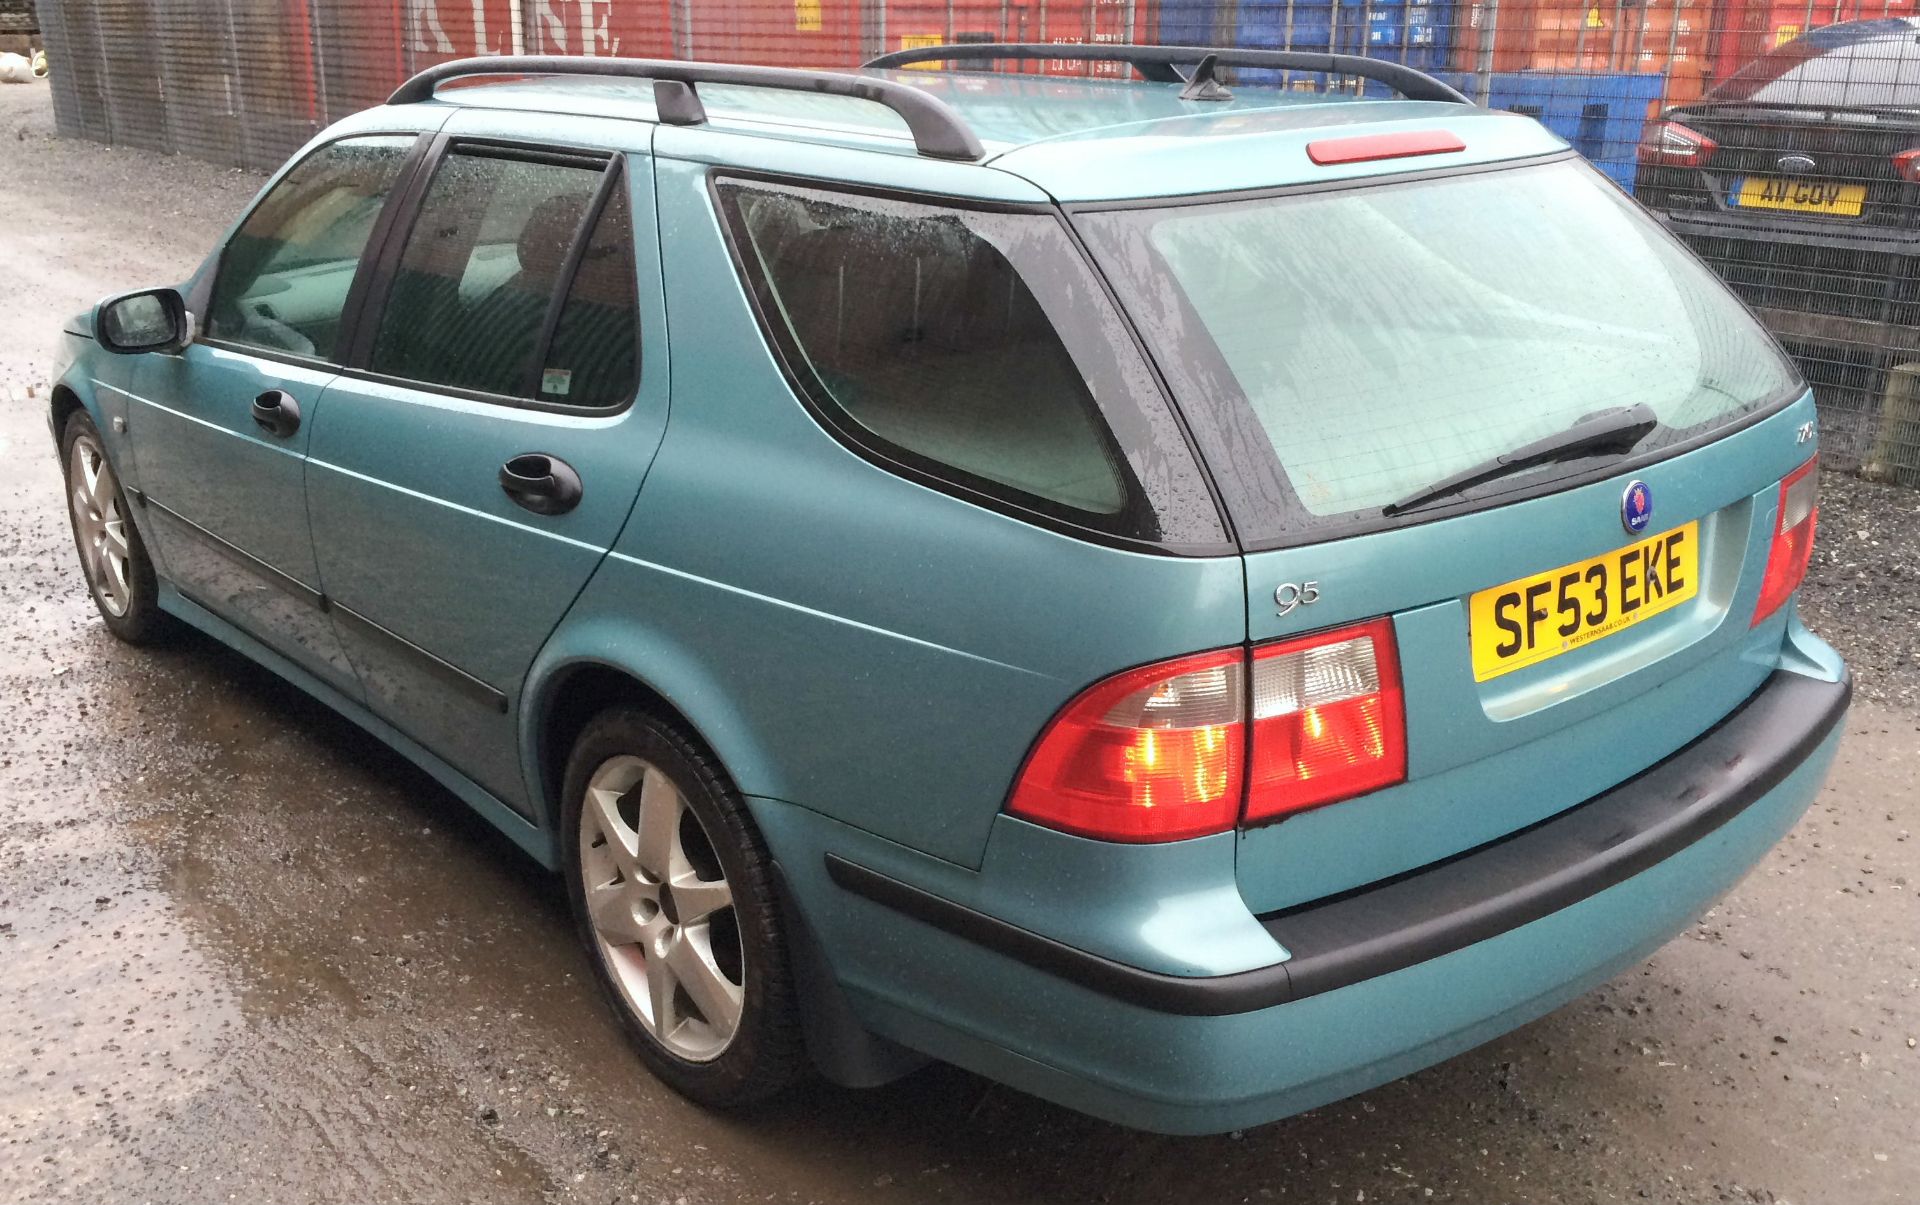 A Saab 9-5 2.0T Vector Estate Car Reg. No.SF53EKE, first registered 25-9-2003, indicated 81,619 - Image 3 of 7